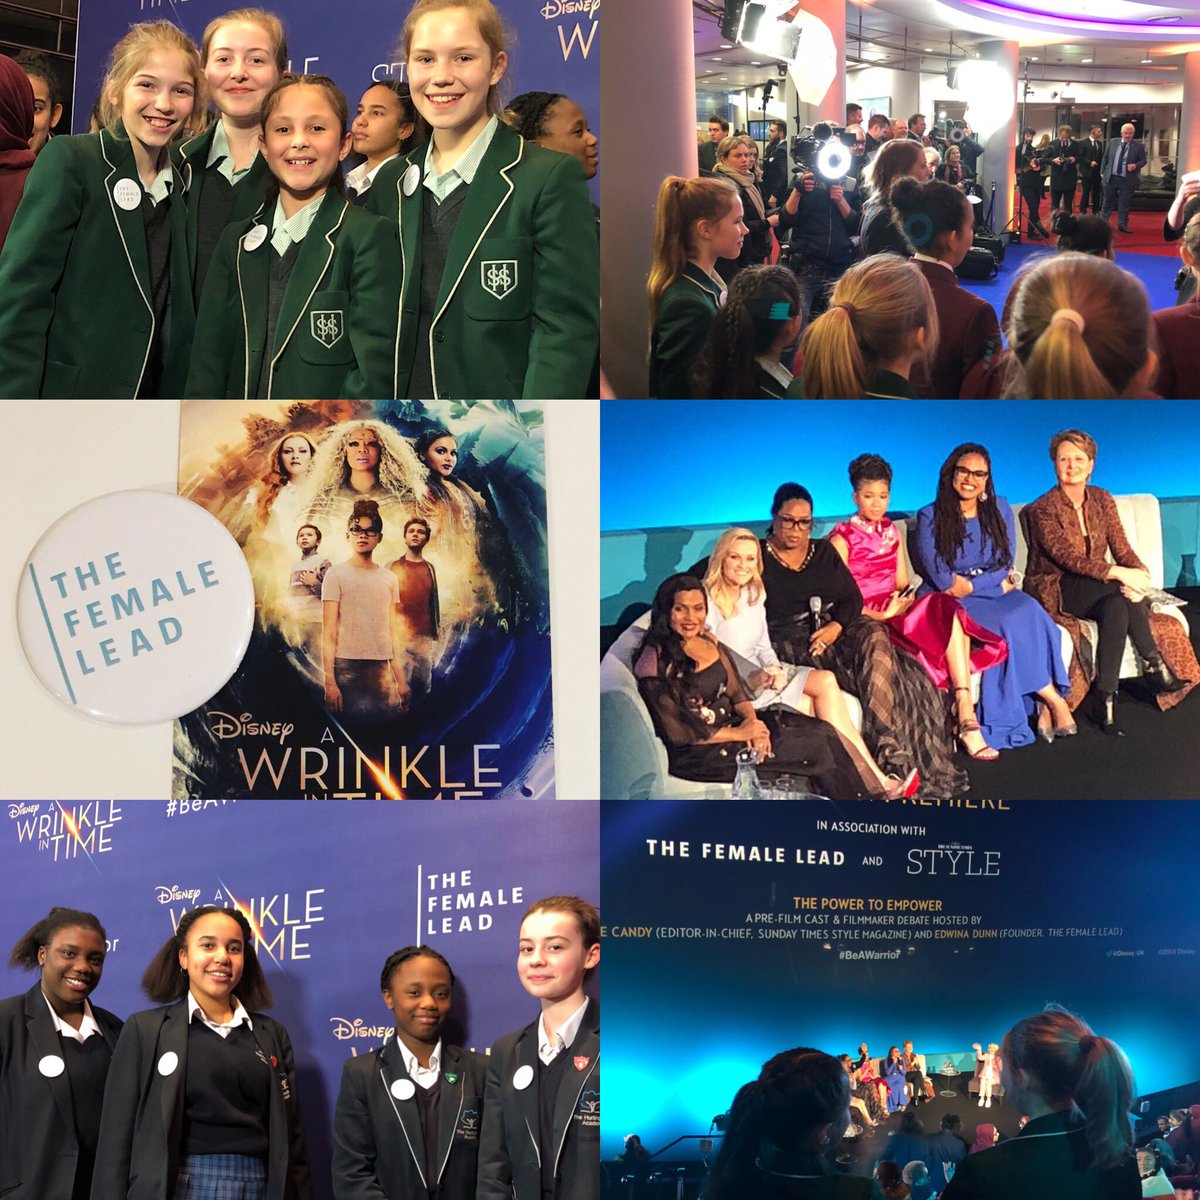 What an amazing night at the premiere of #wrinkleintime - Film ✔️ Cast ✔️ Empowered ✔️ Happy Students ✔️ - Thank you @female_lead @Edwina_Dunn for inviting us @ava @Oprah @mindykaling @RWitherspoon @PrincipalSHS @SurbitonHigh @PoolJenny @TheHurlinghamAc @7billionideas